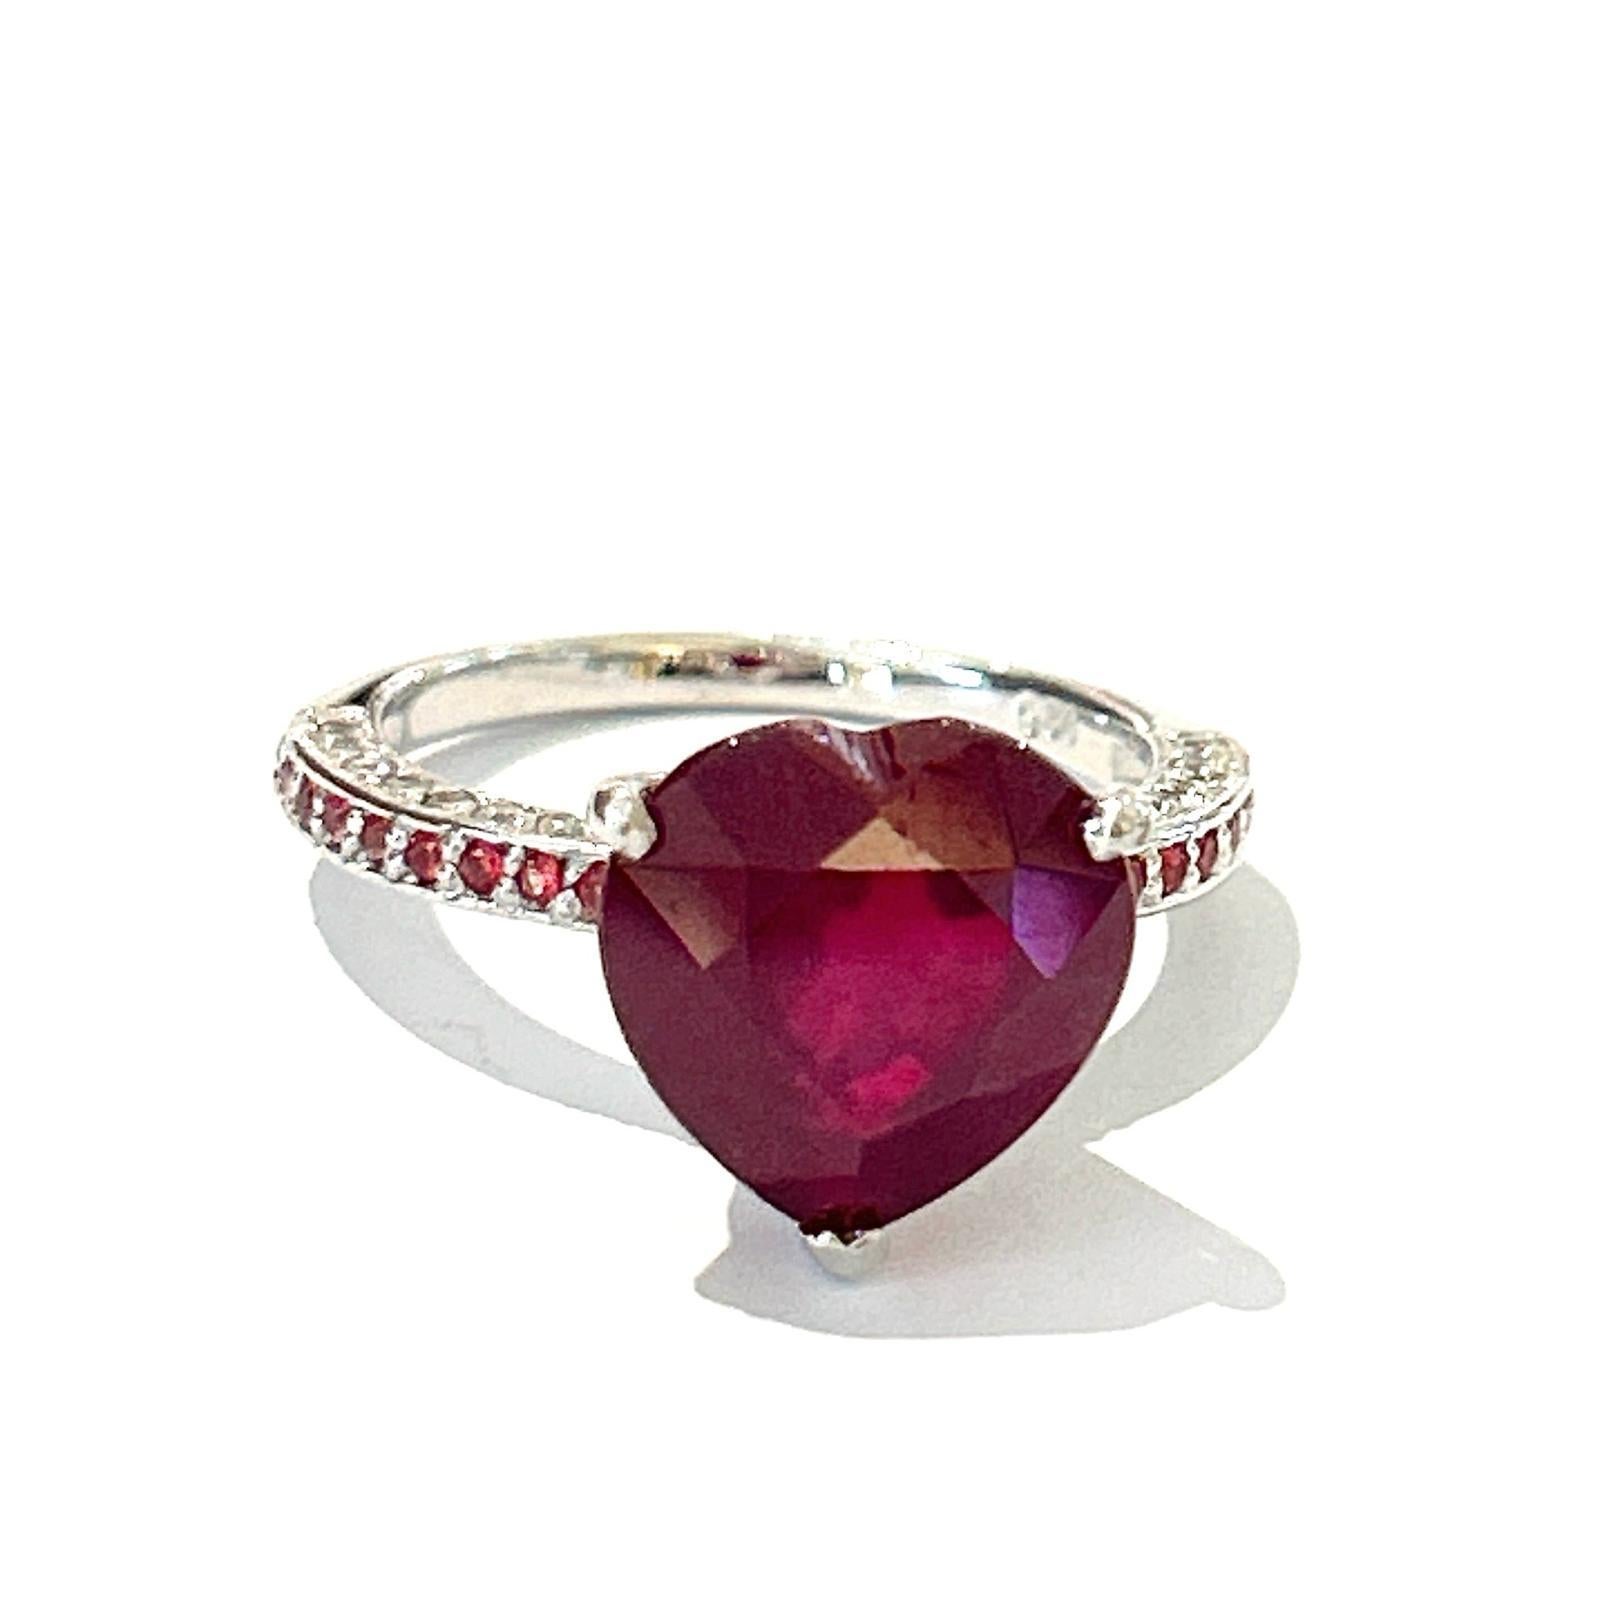 Bochic “Orient” Diamond & Ruby Vintage Cocktail Ring Set In 18K & Silver  In New Condition For Sale In New York, NY